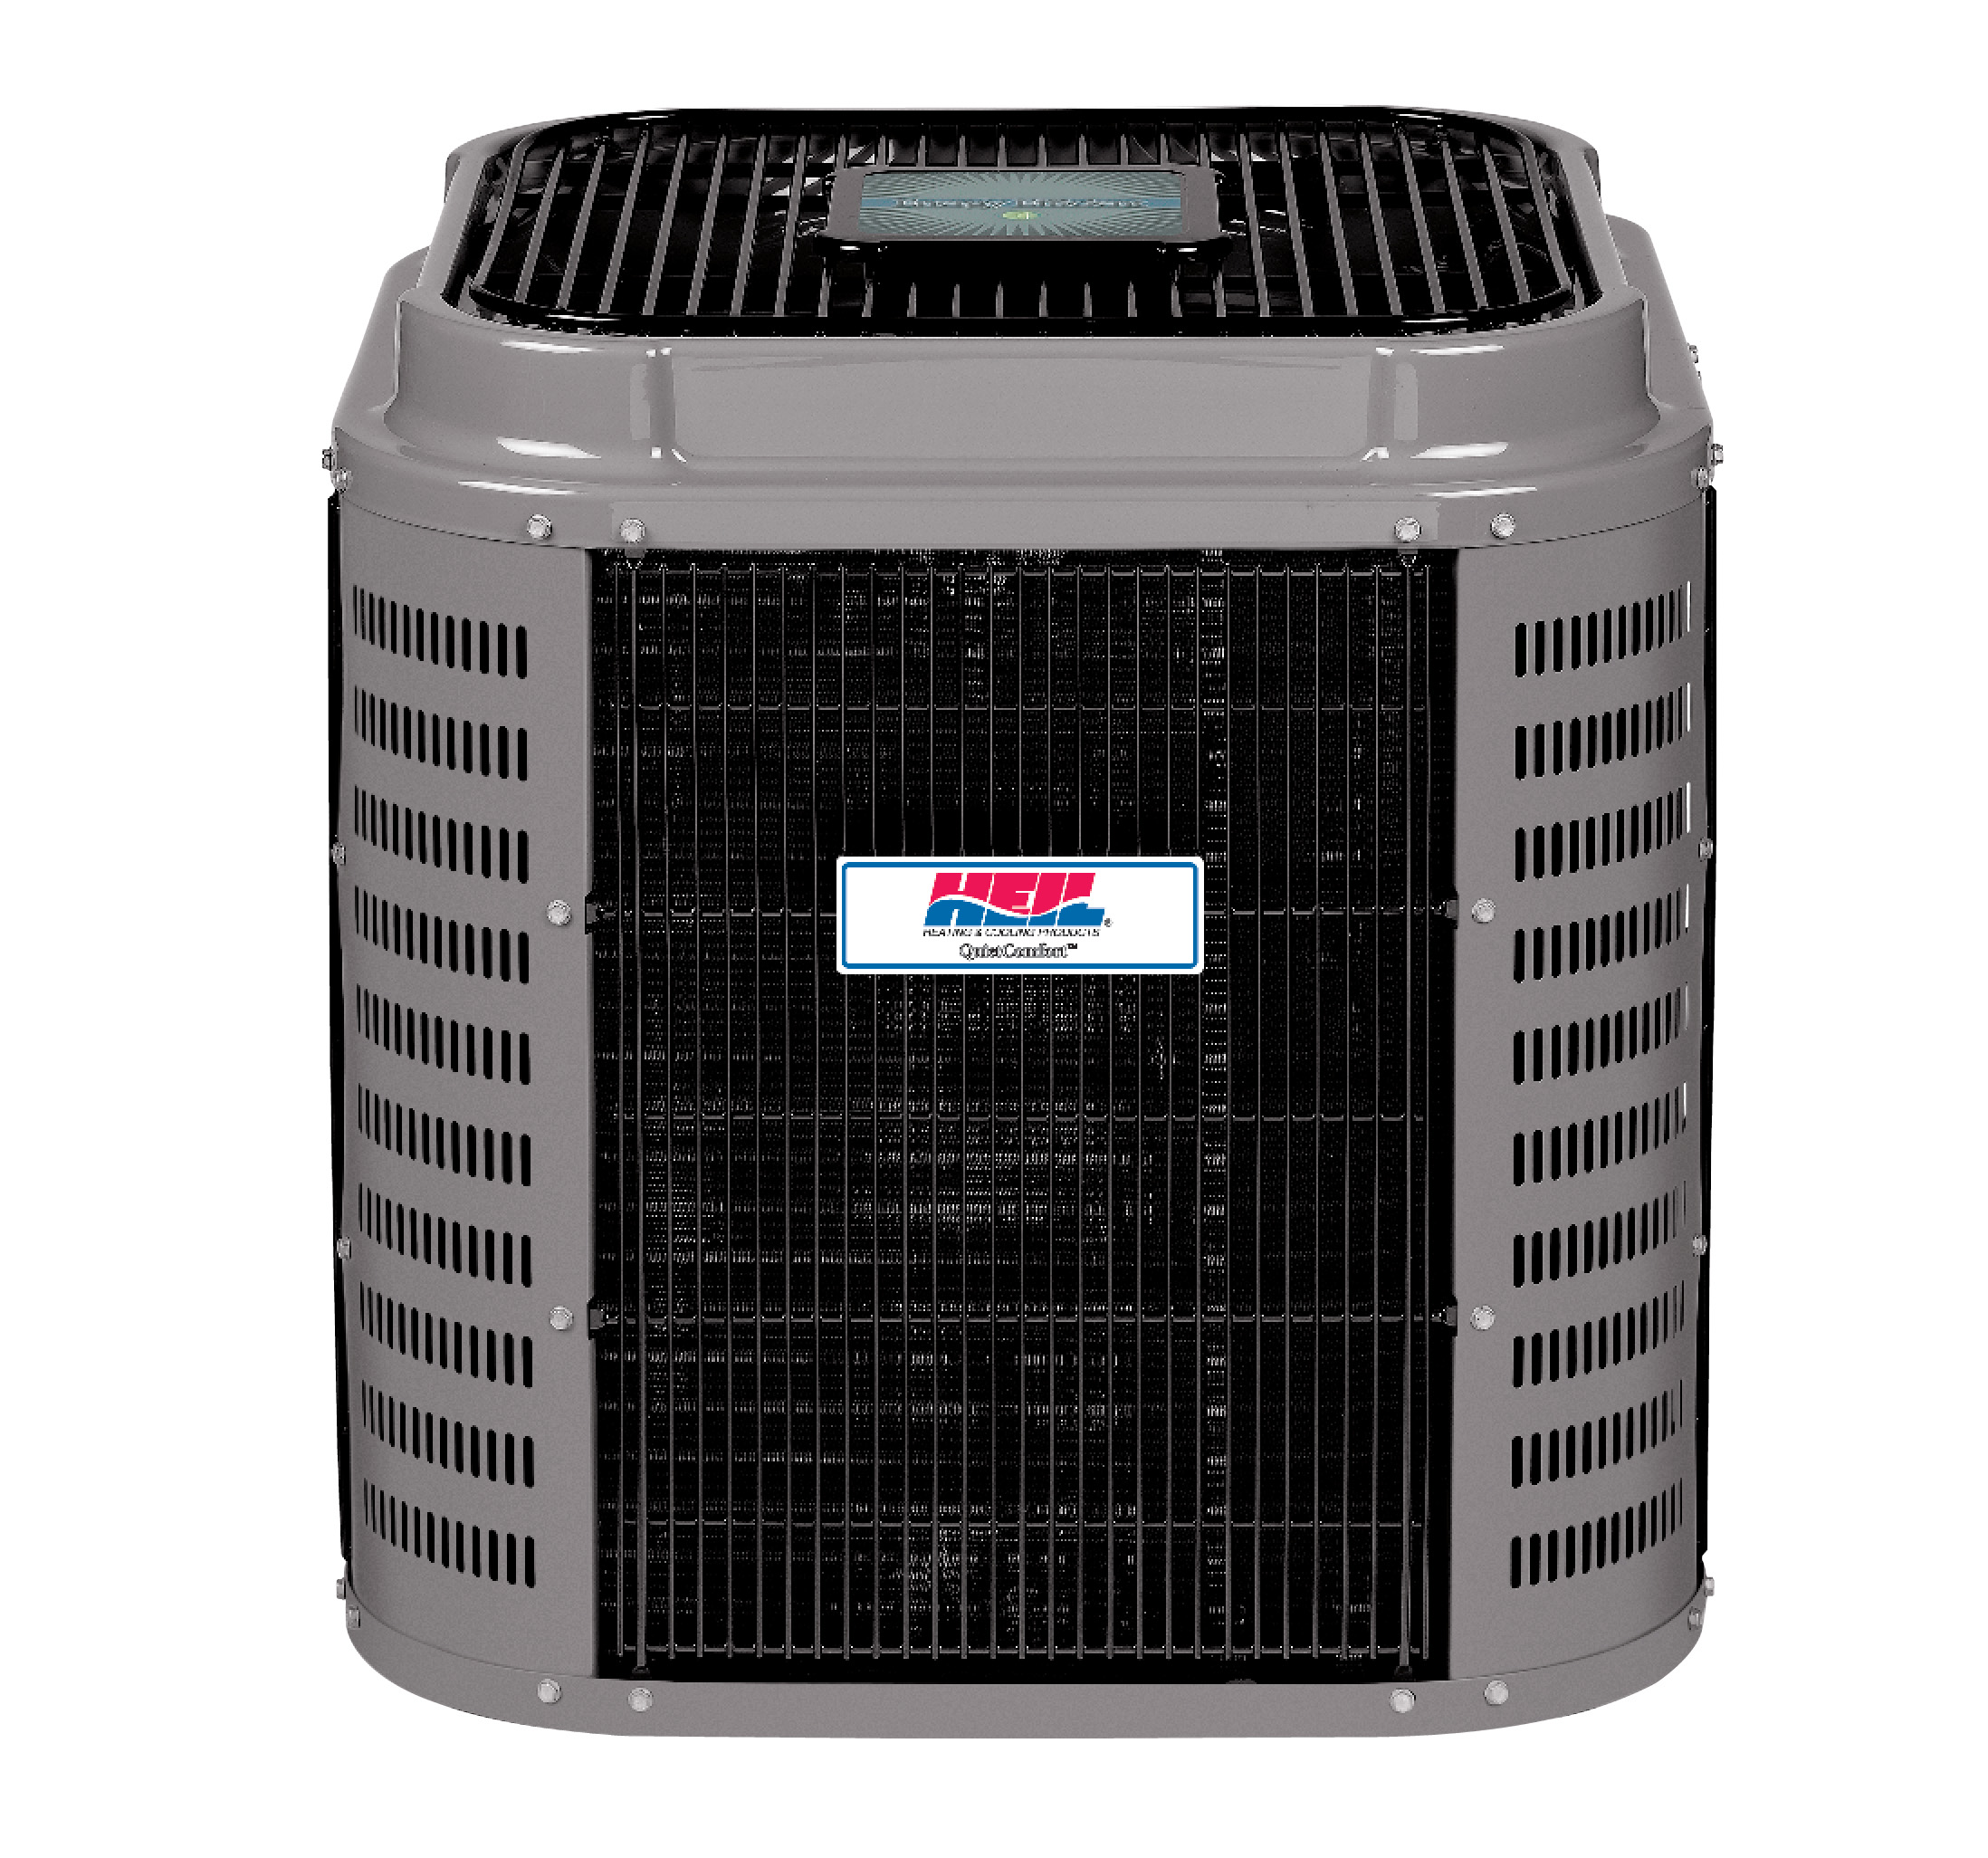 HEIL R410A 5TON 2STAGE
COMMUNICATING CONDENSER